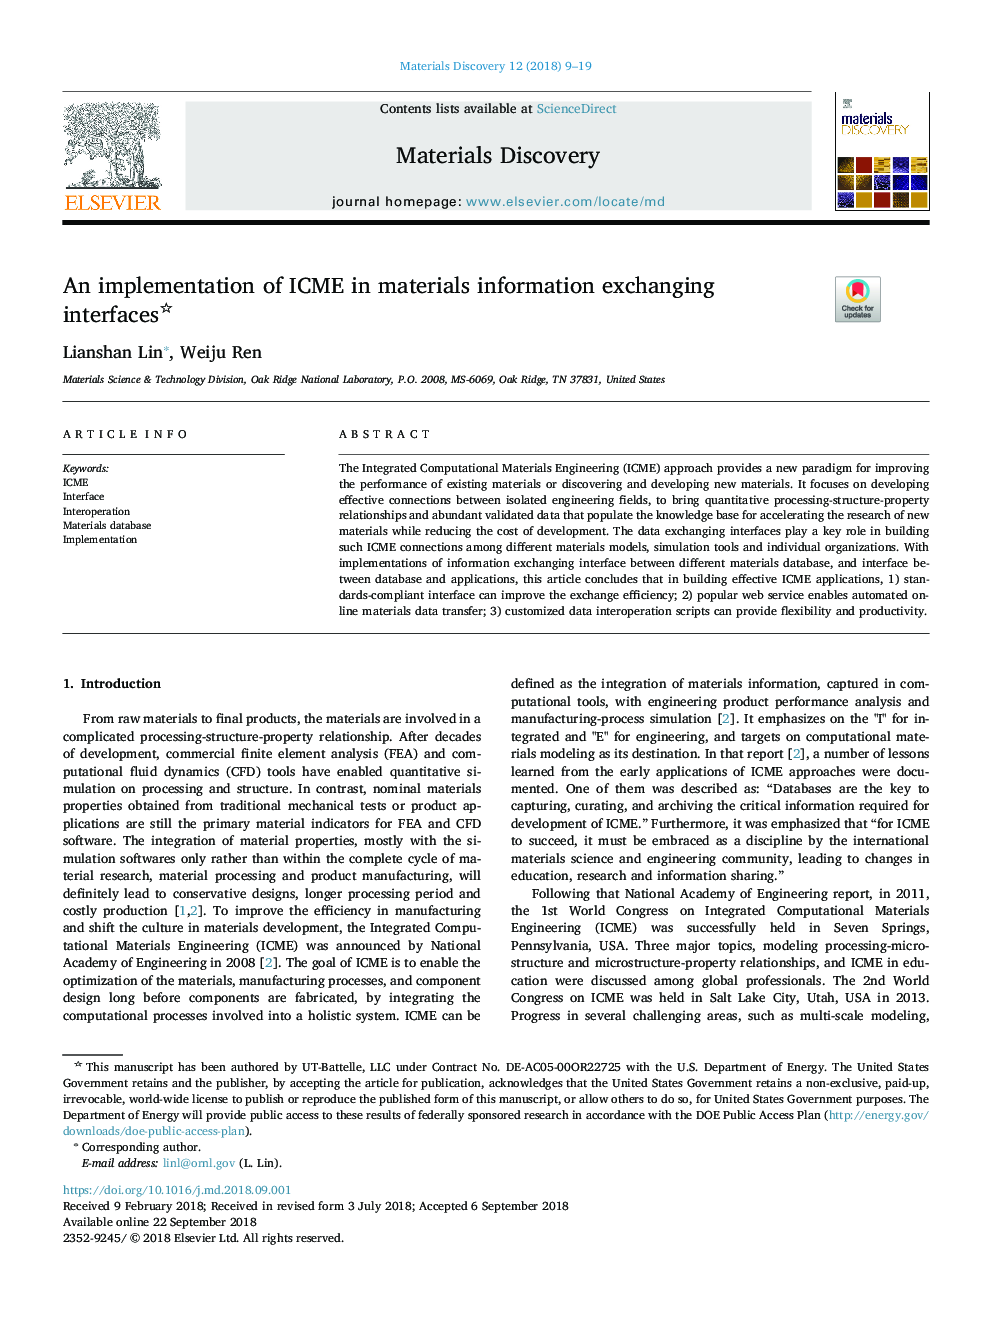 An implementation of ICME in materials information exchanging interfaces